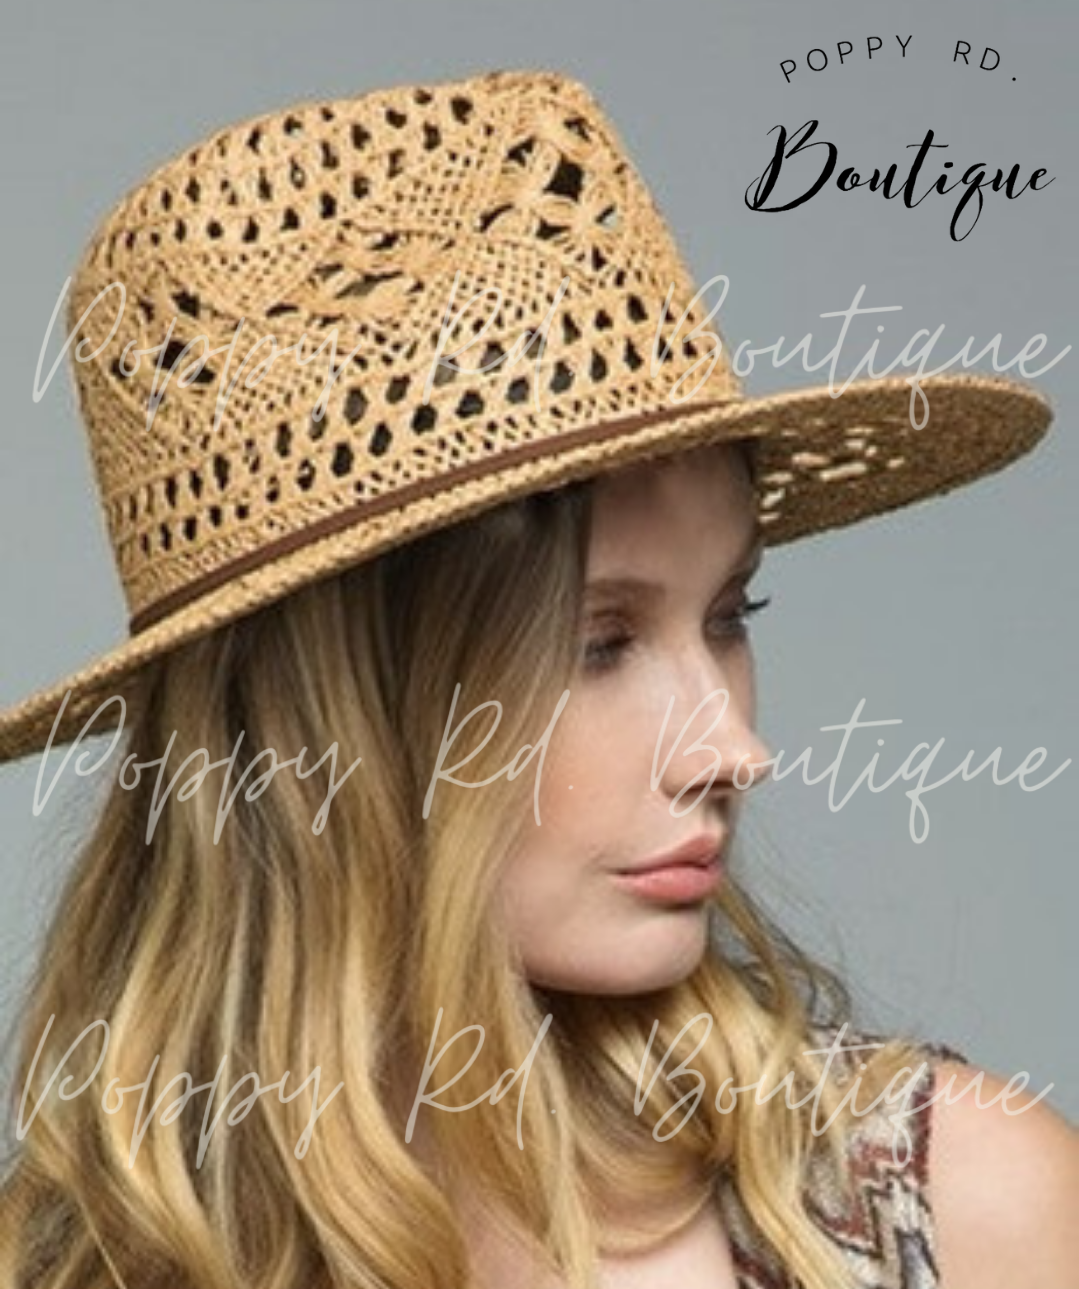 Open Weave Panama hat with leather band in natural